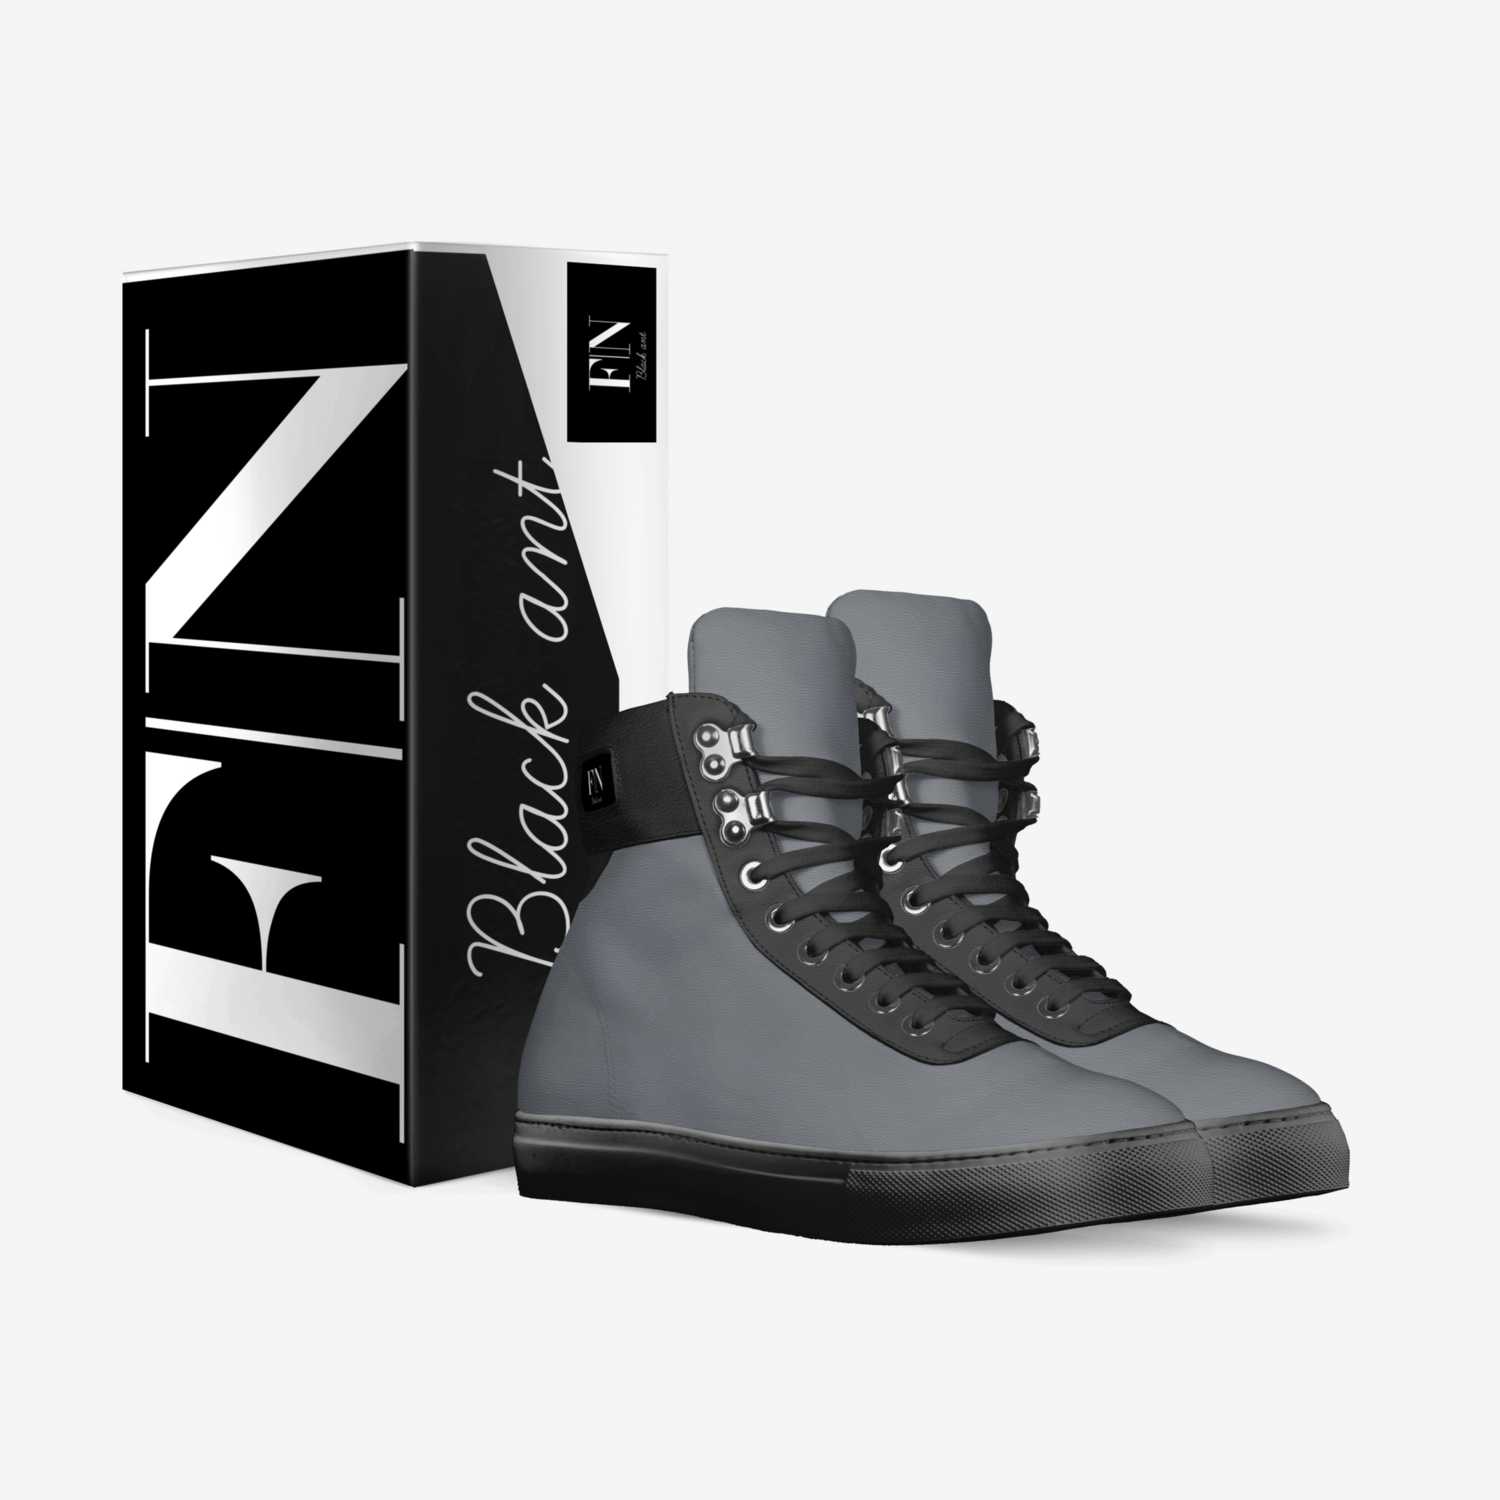 Fourmi Noir custom made in Italy shoes by Anthony Tyler | Box view